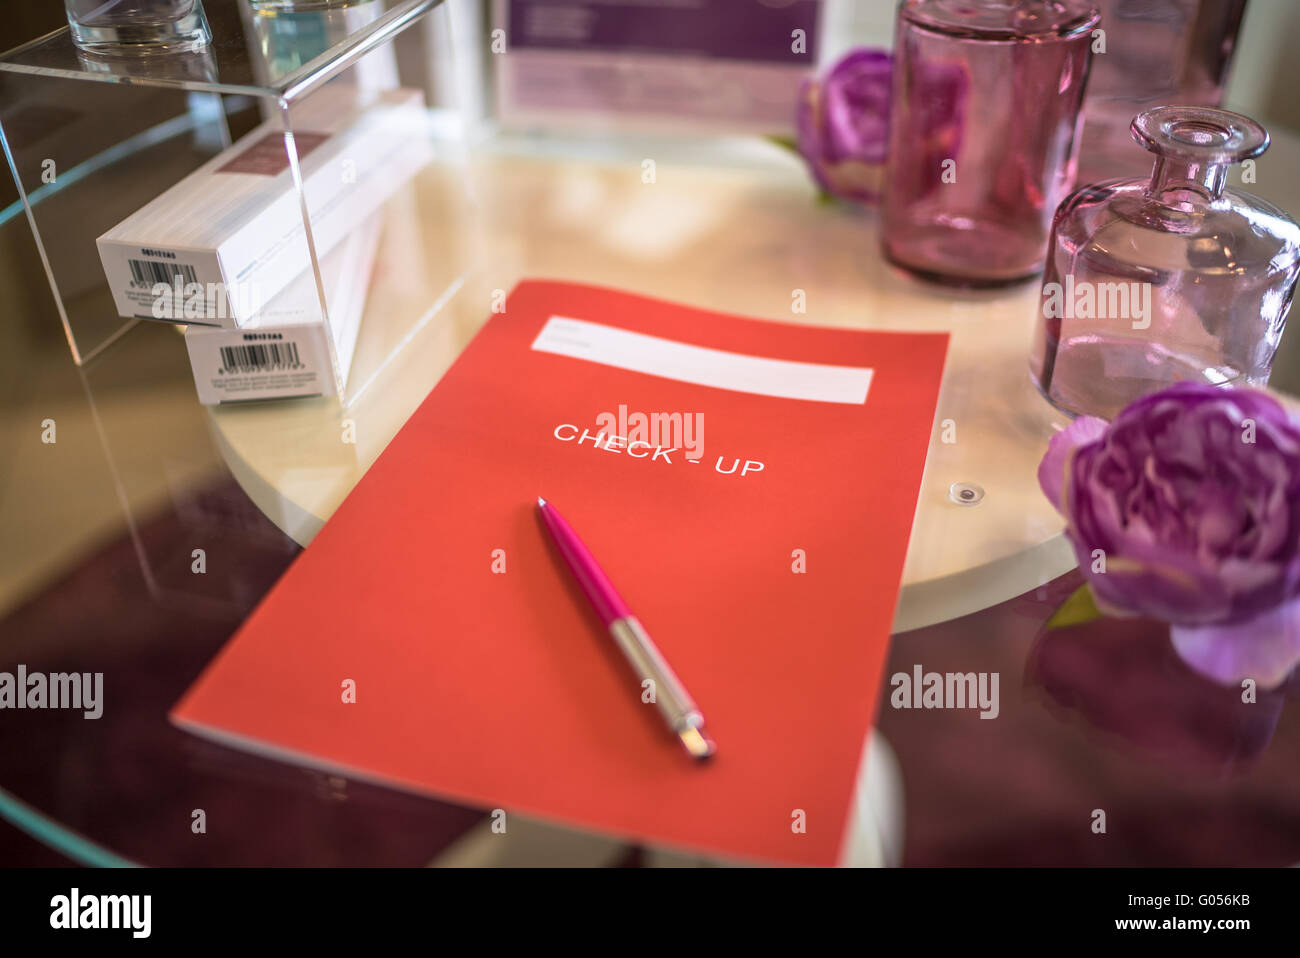 Check up dossier in a beauty salon. Stock Photo